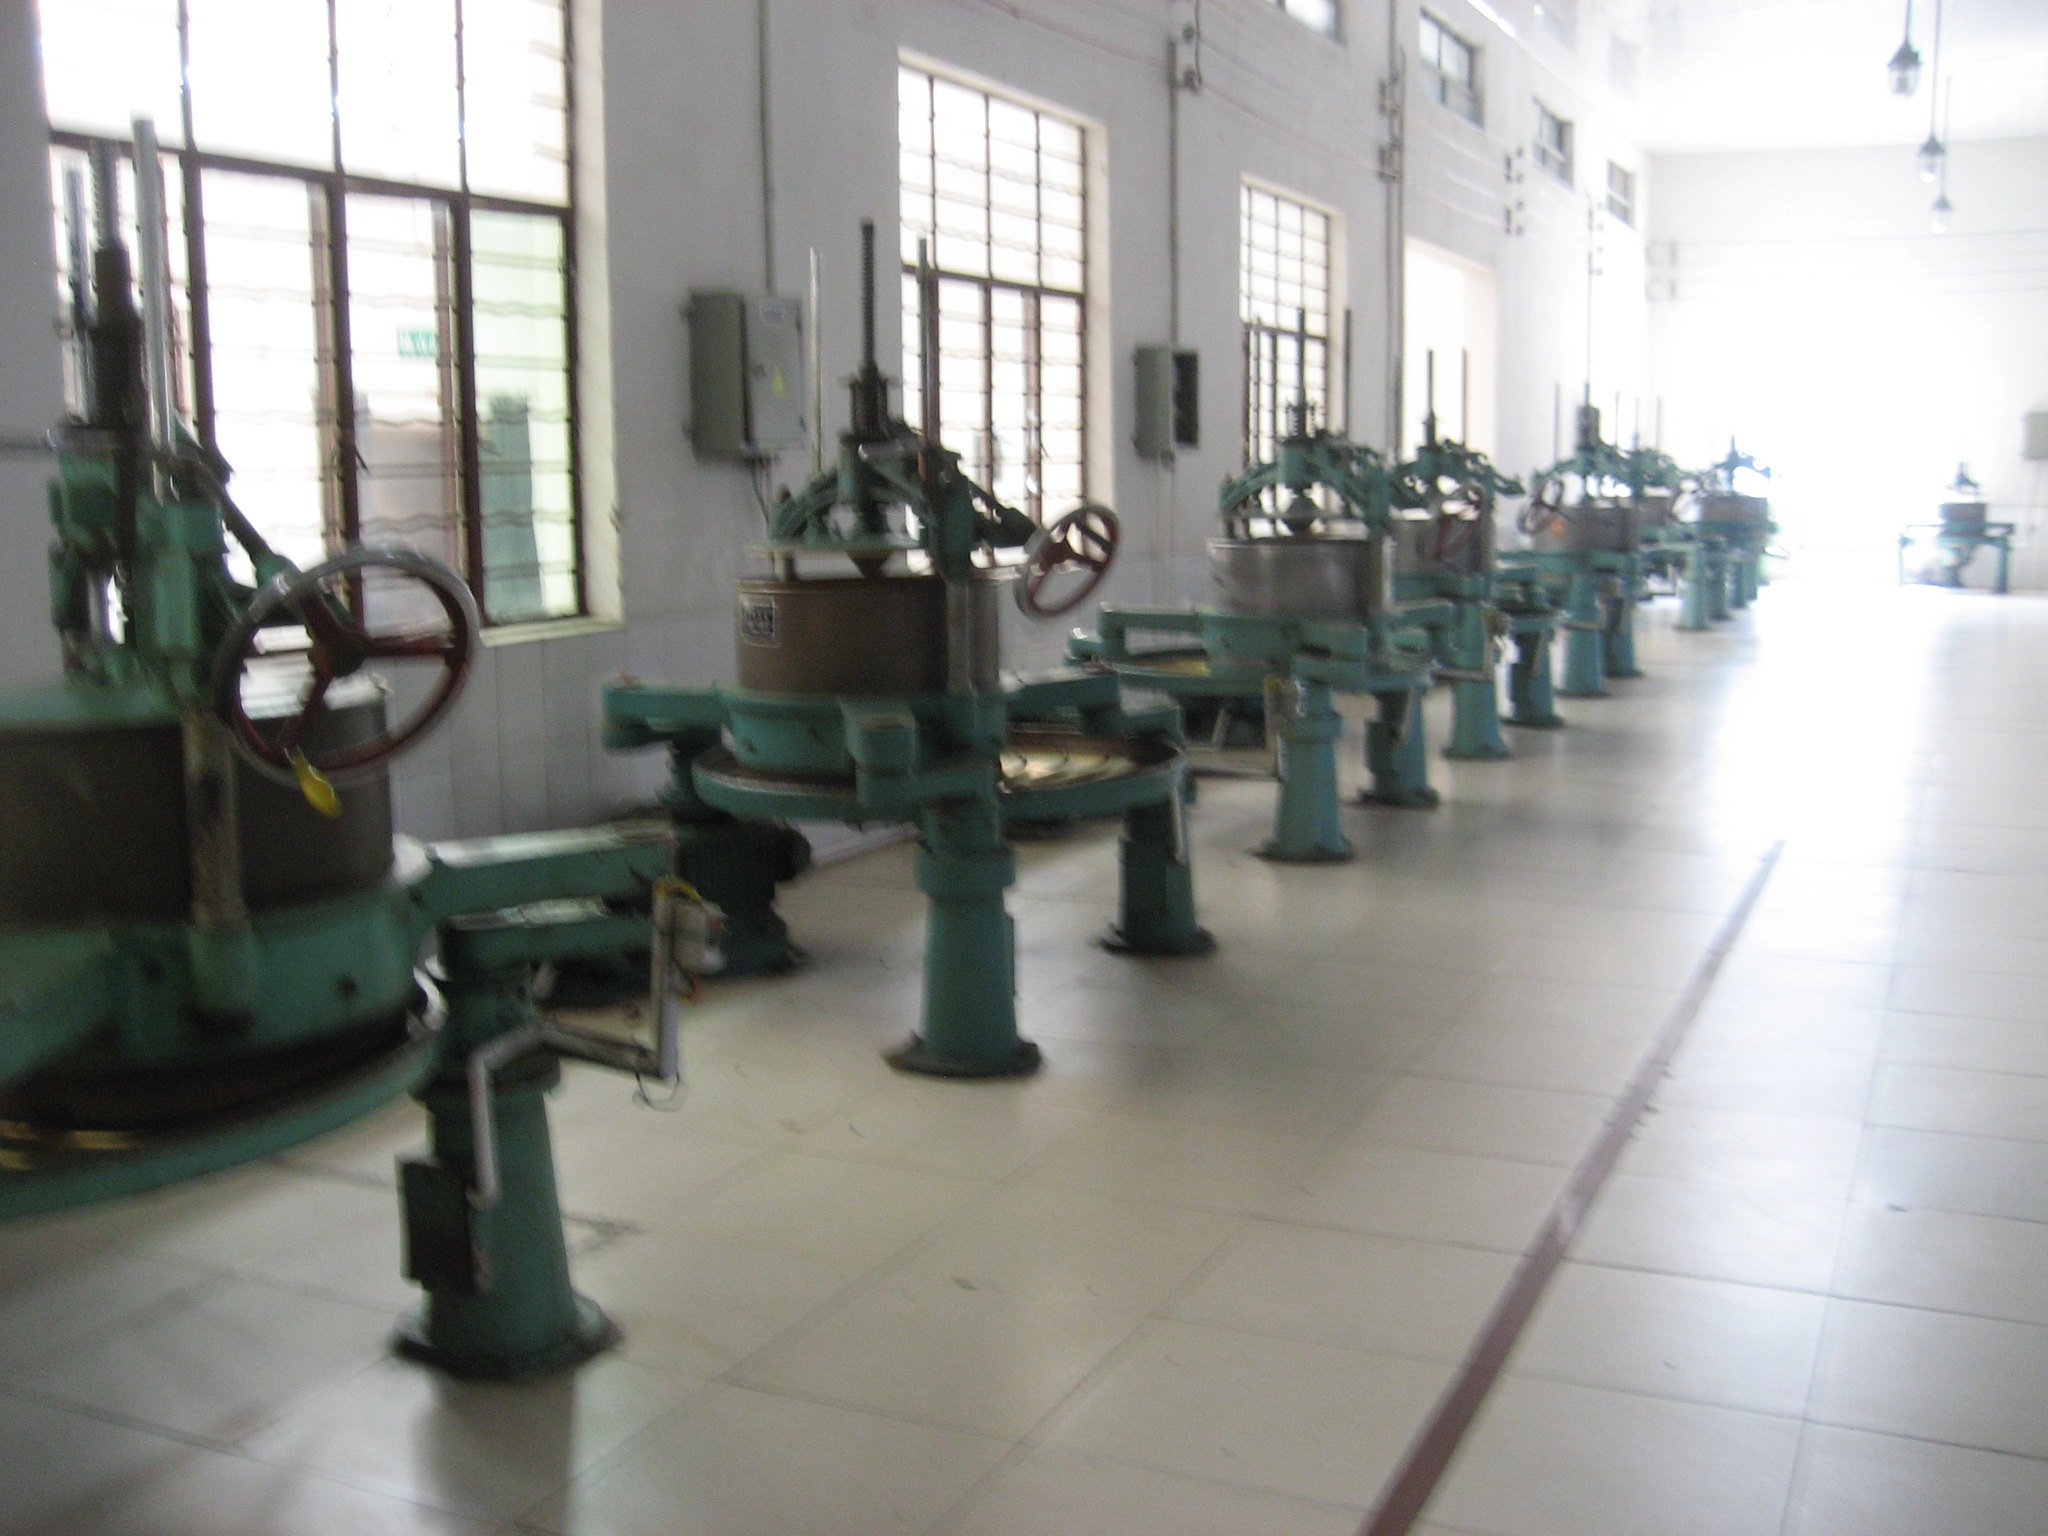 Rolling Machines Standing at Attention